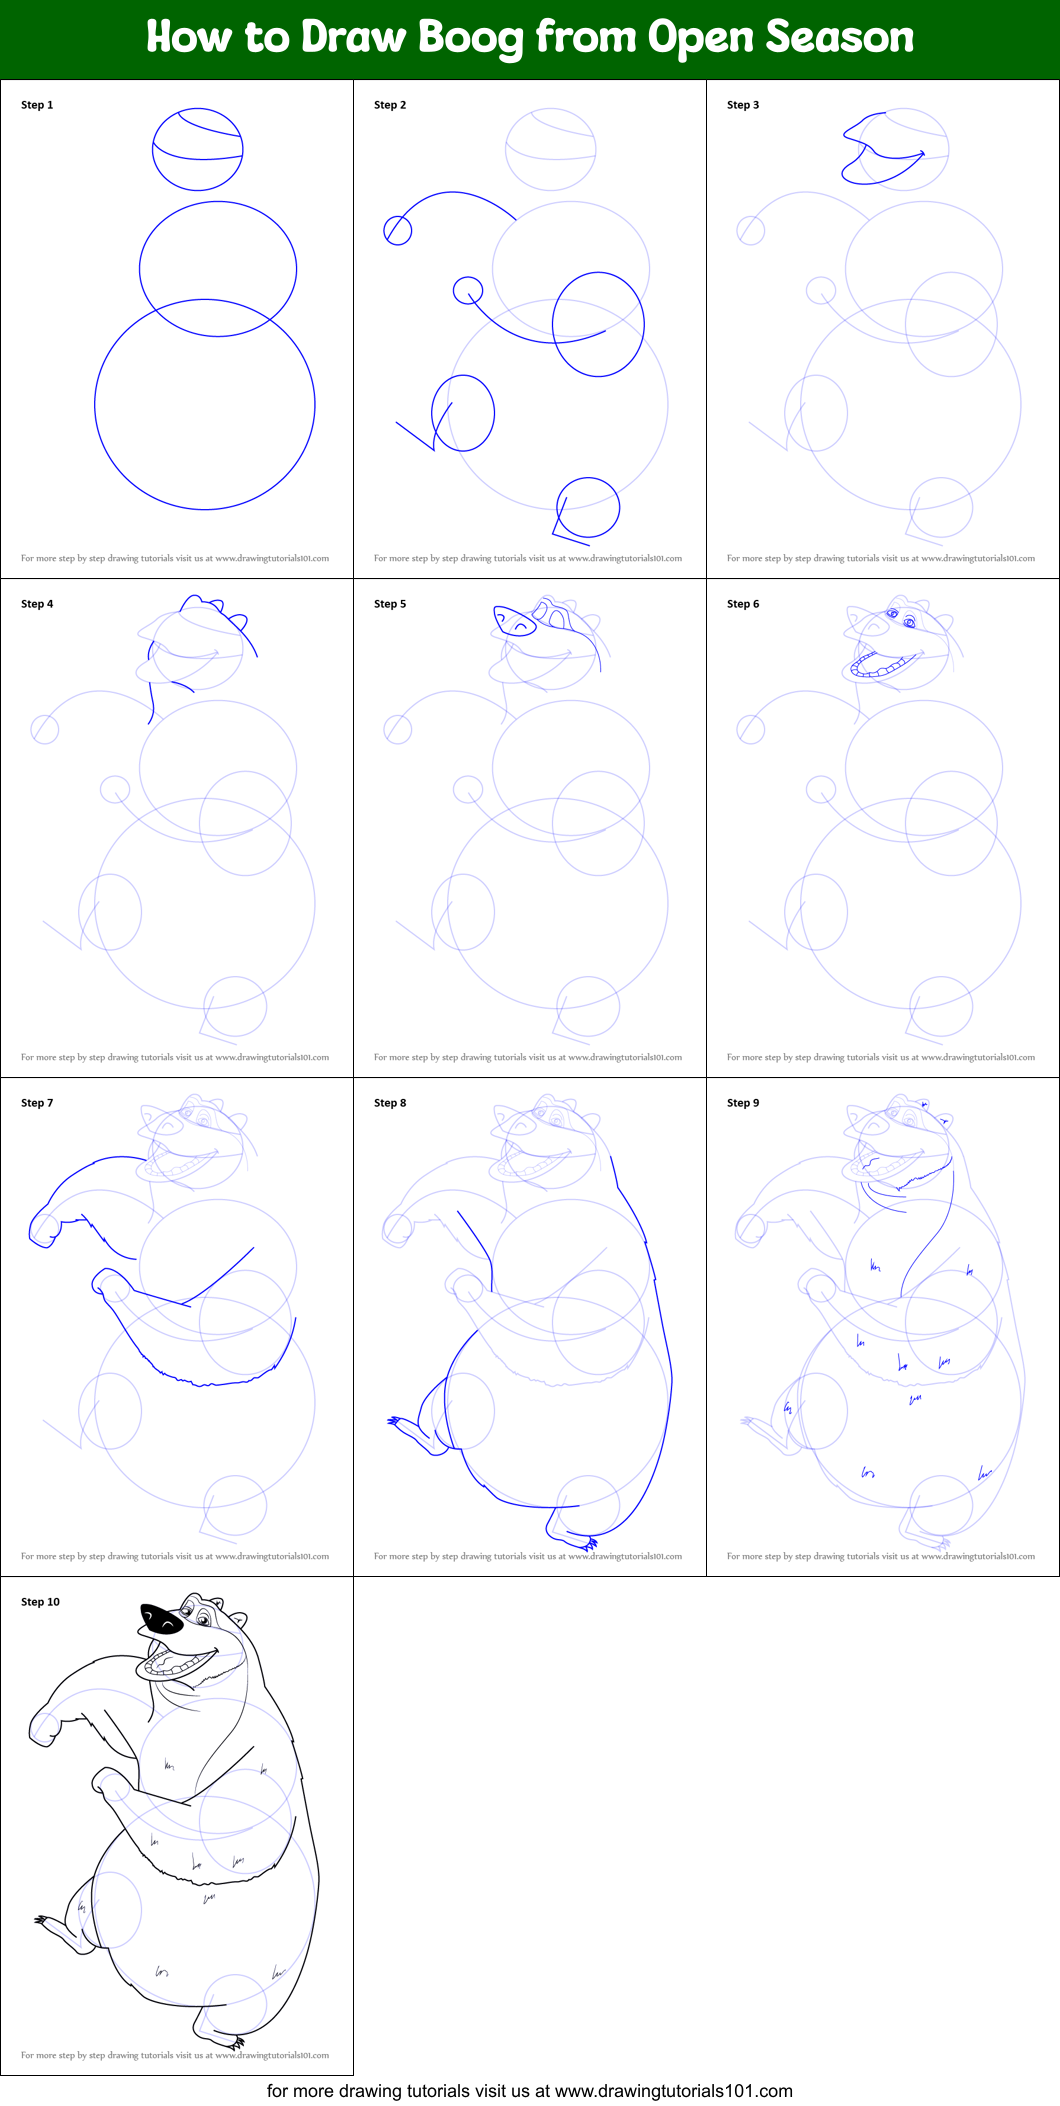 How to Draw Boog from Open Season printable step by step drawing sheet